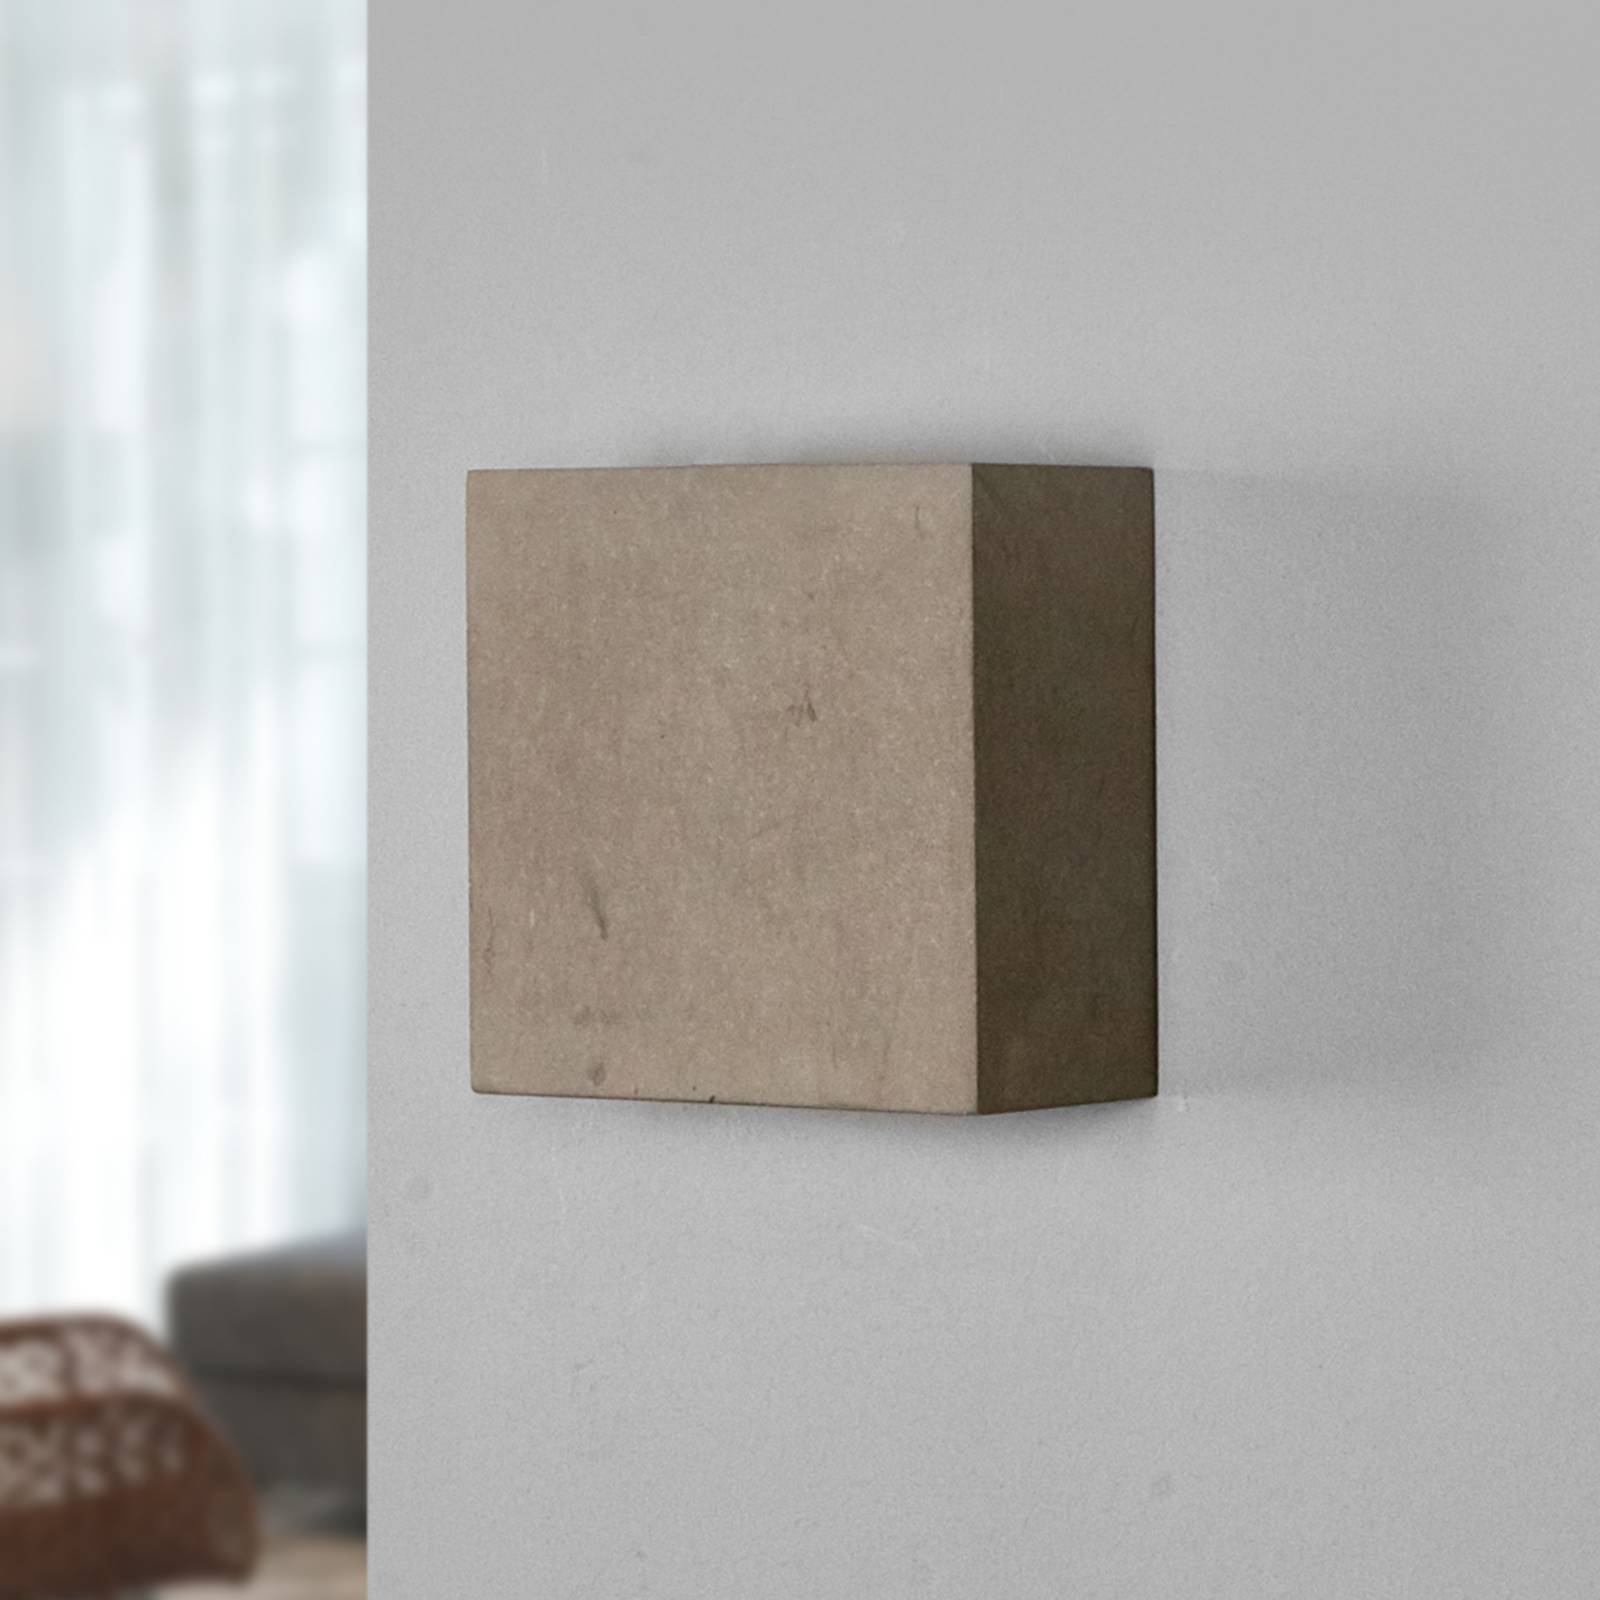 Photos - Chandelier / Lamp Lindby Yva - LED wall light, concrete 